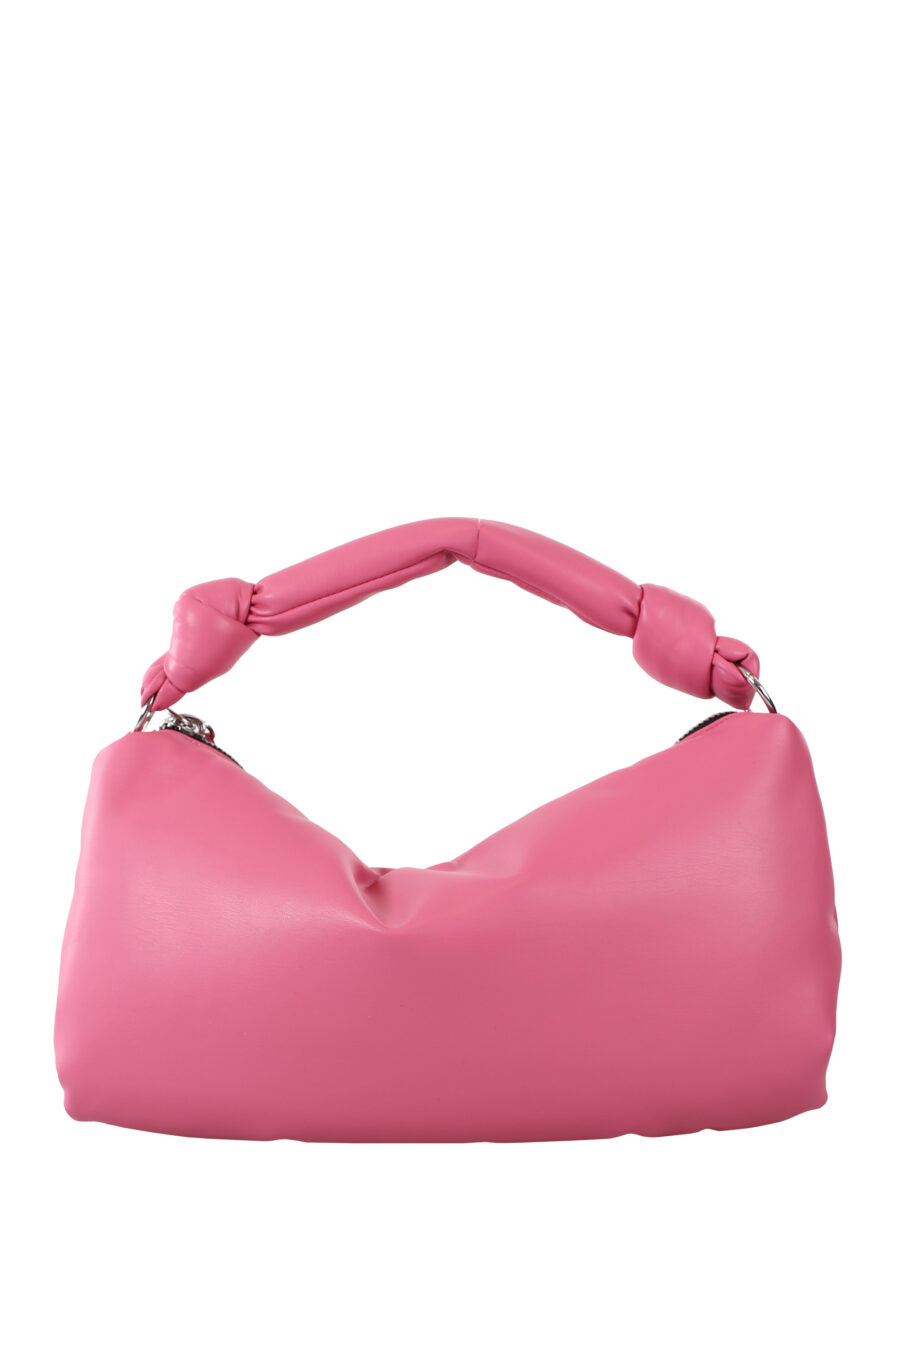 Pink knotted shoulder bag with monochrome logo - IMG 1669